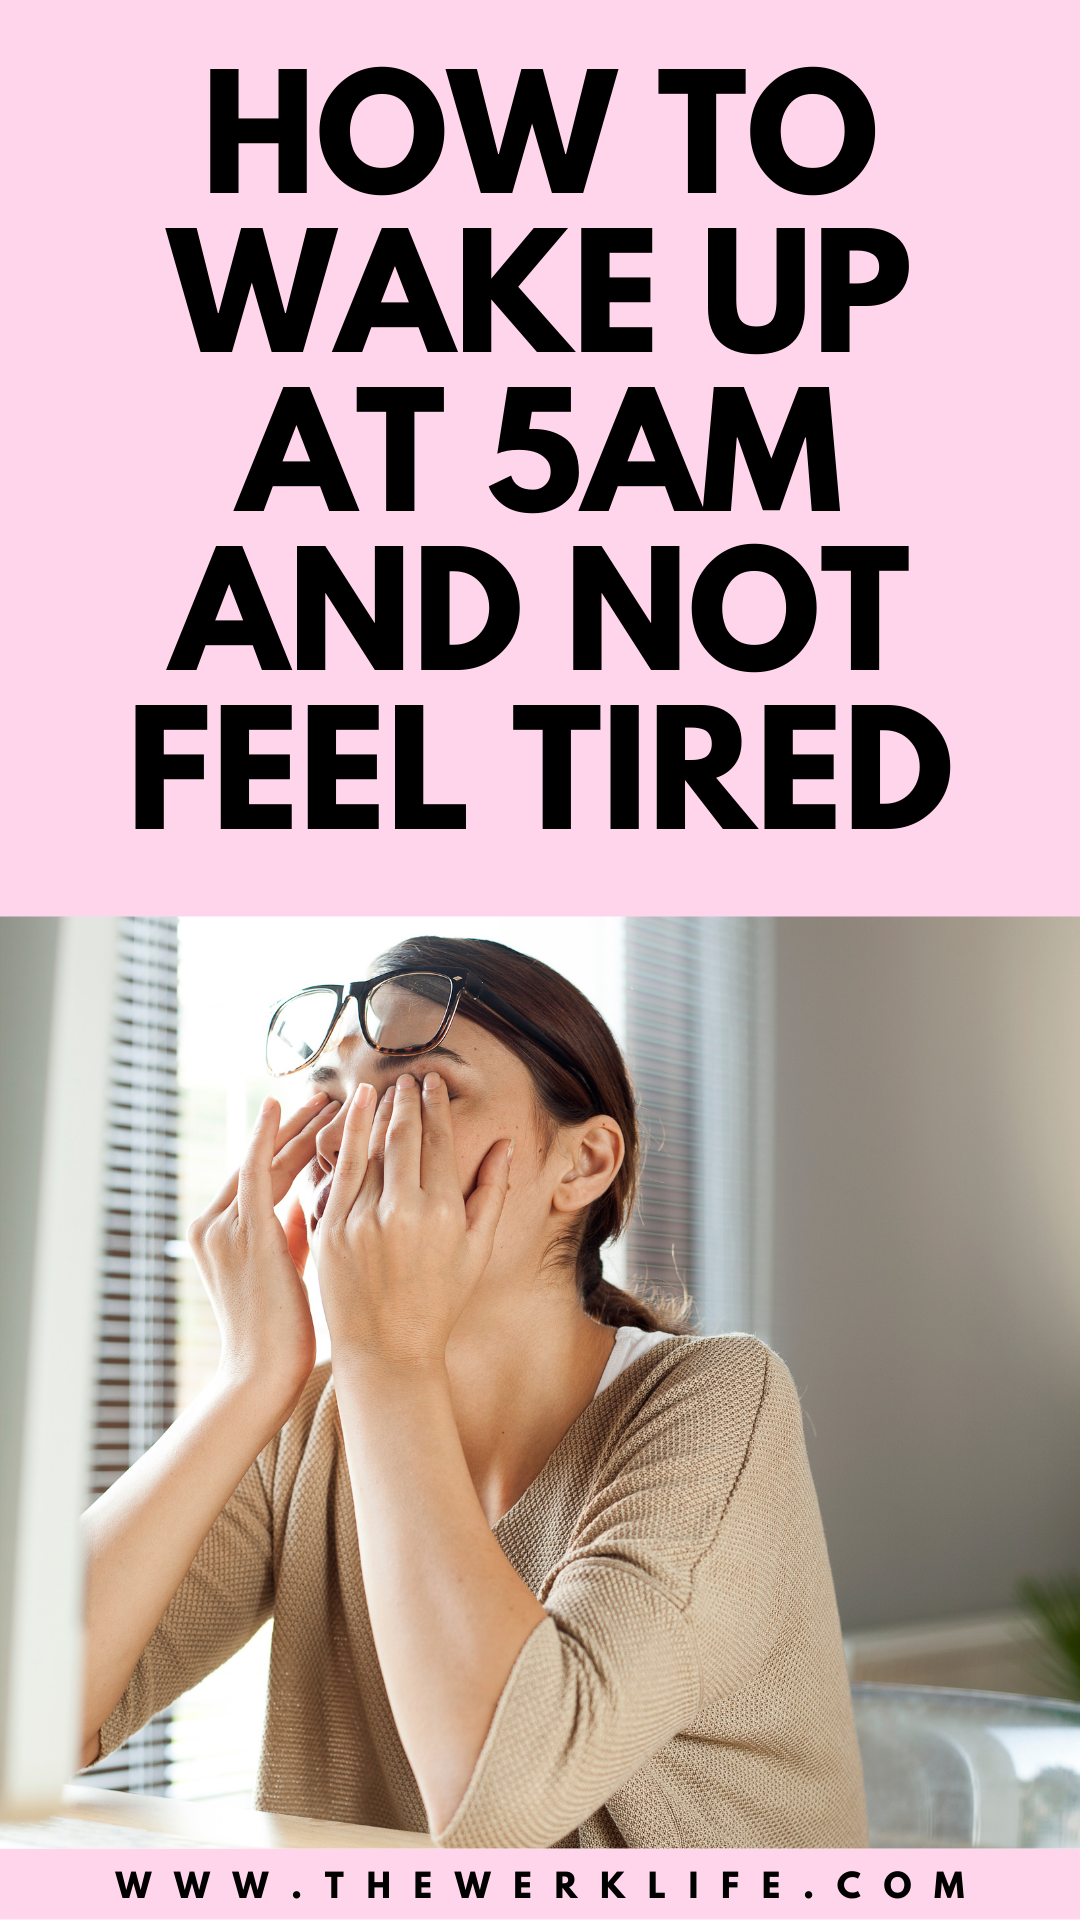 HOW TO WAKE UP AT 5AM AND NOT FEEL TIRED